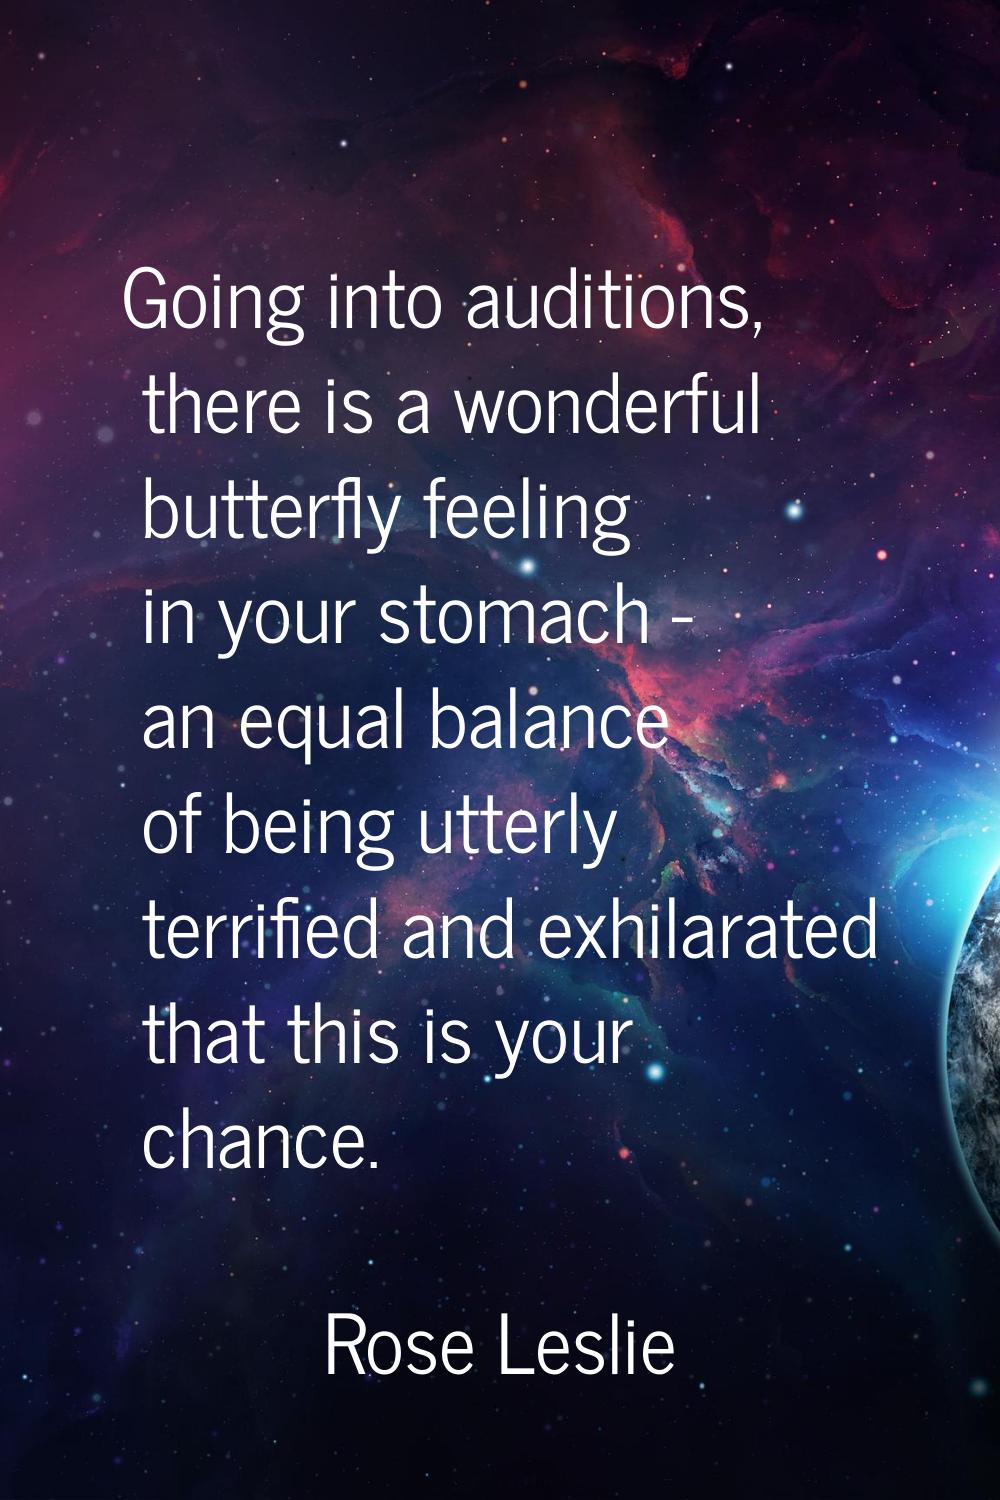 Going into auditions, there is a wonderful butterfly feeling in your stomach - an equal balance of 